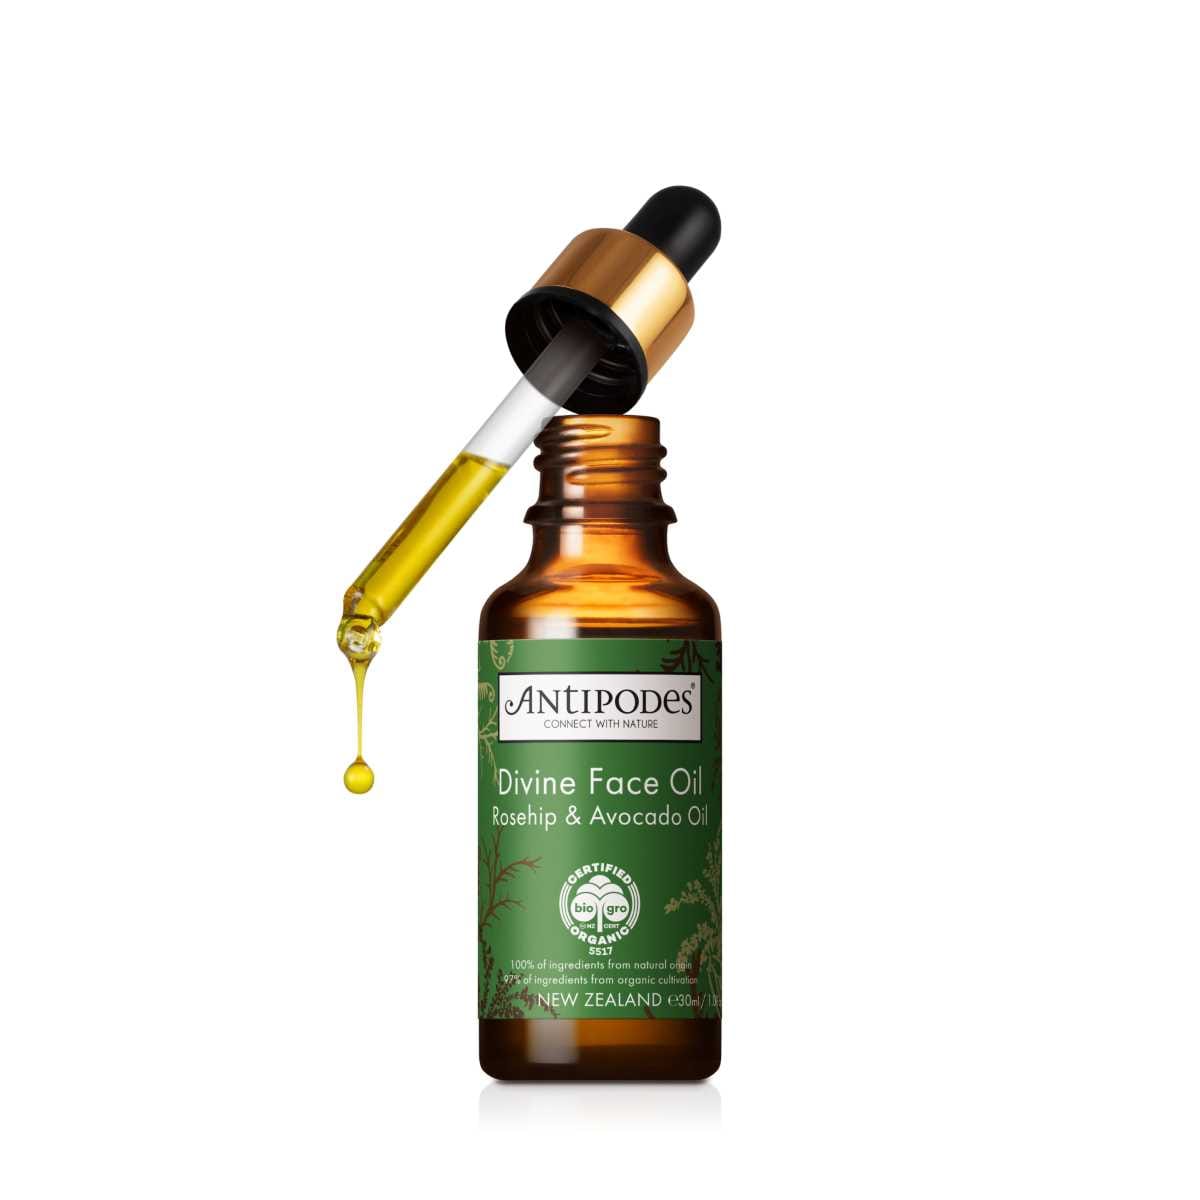 Antipodes Divine Face Oil with Rosehip & Avocado Oil 30ml